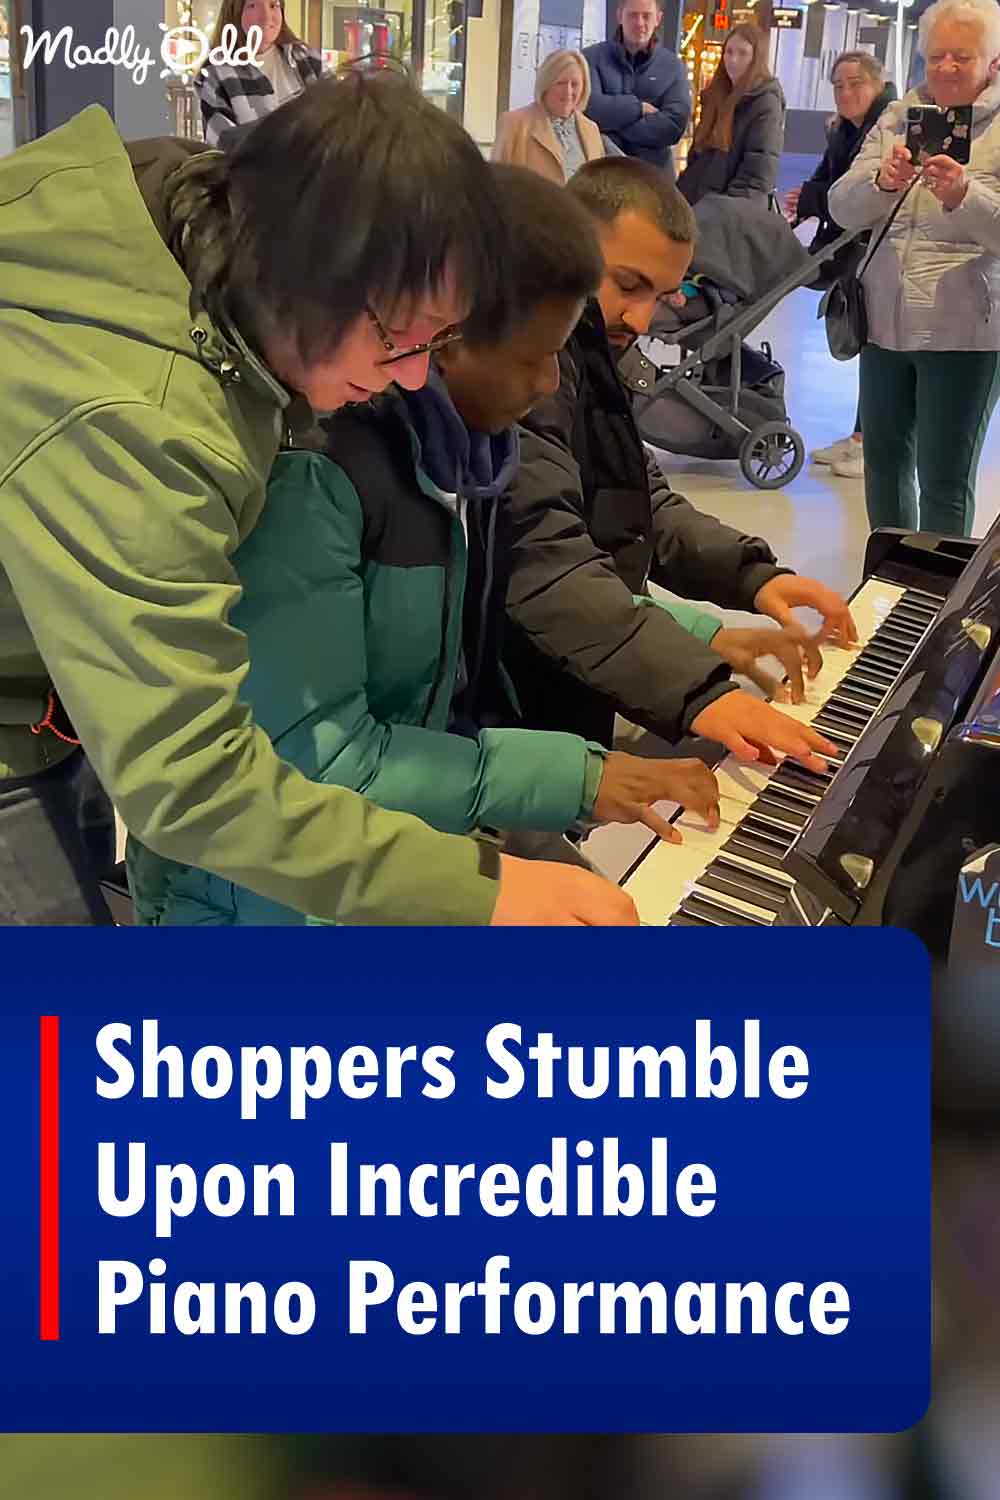 Shoppers Stumble Upon Incredible Piano Performance